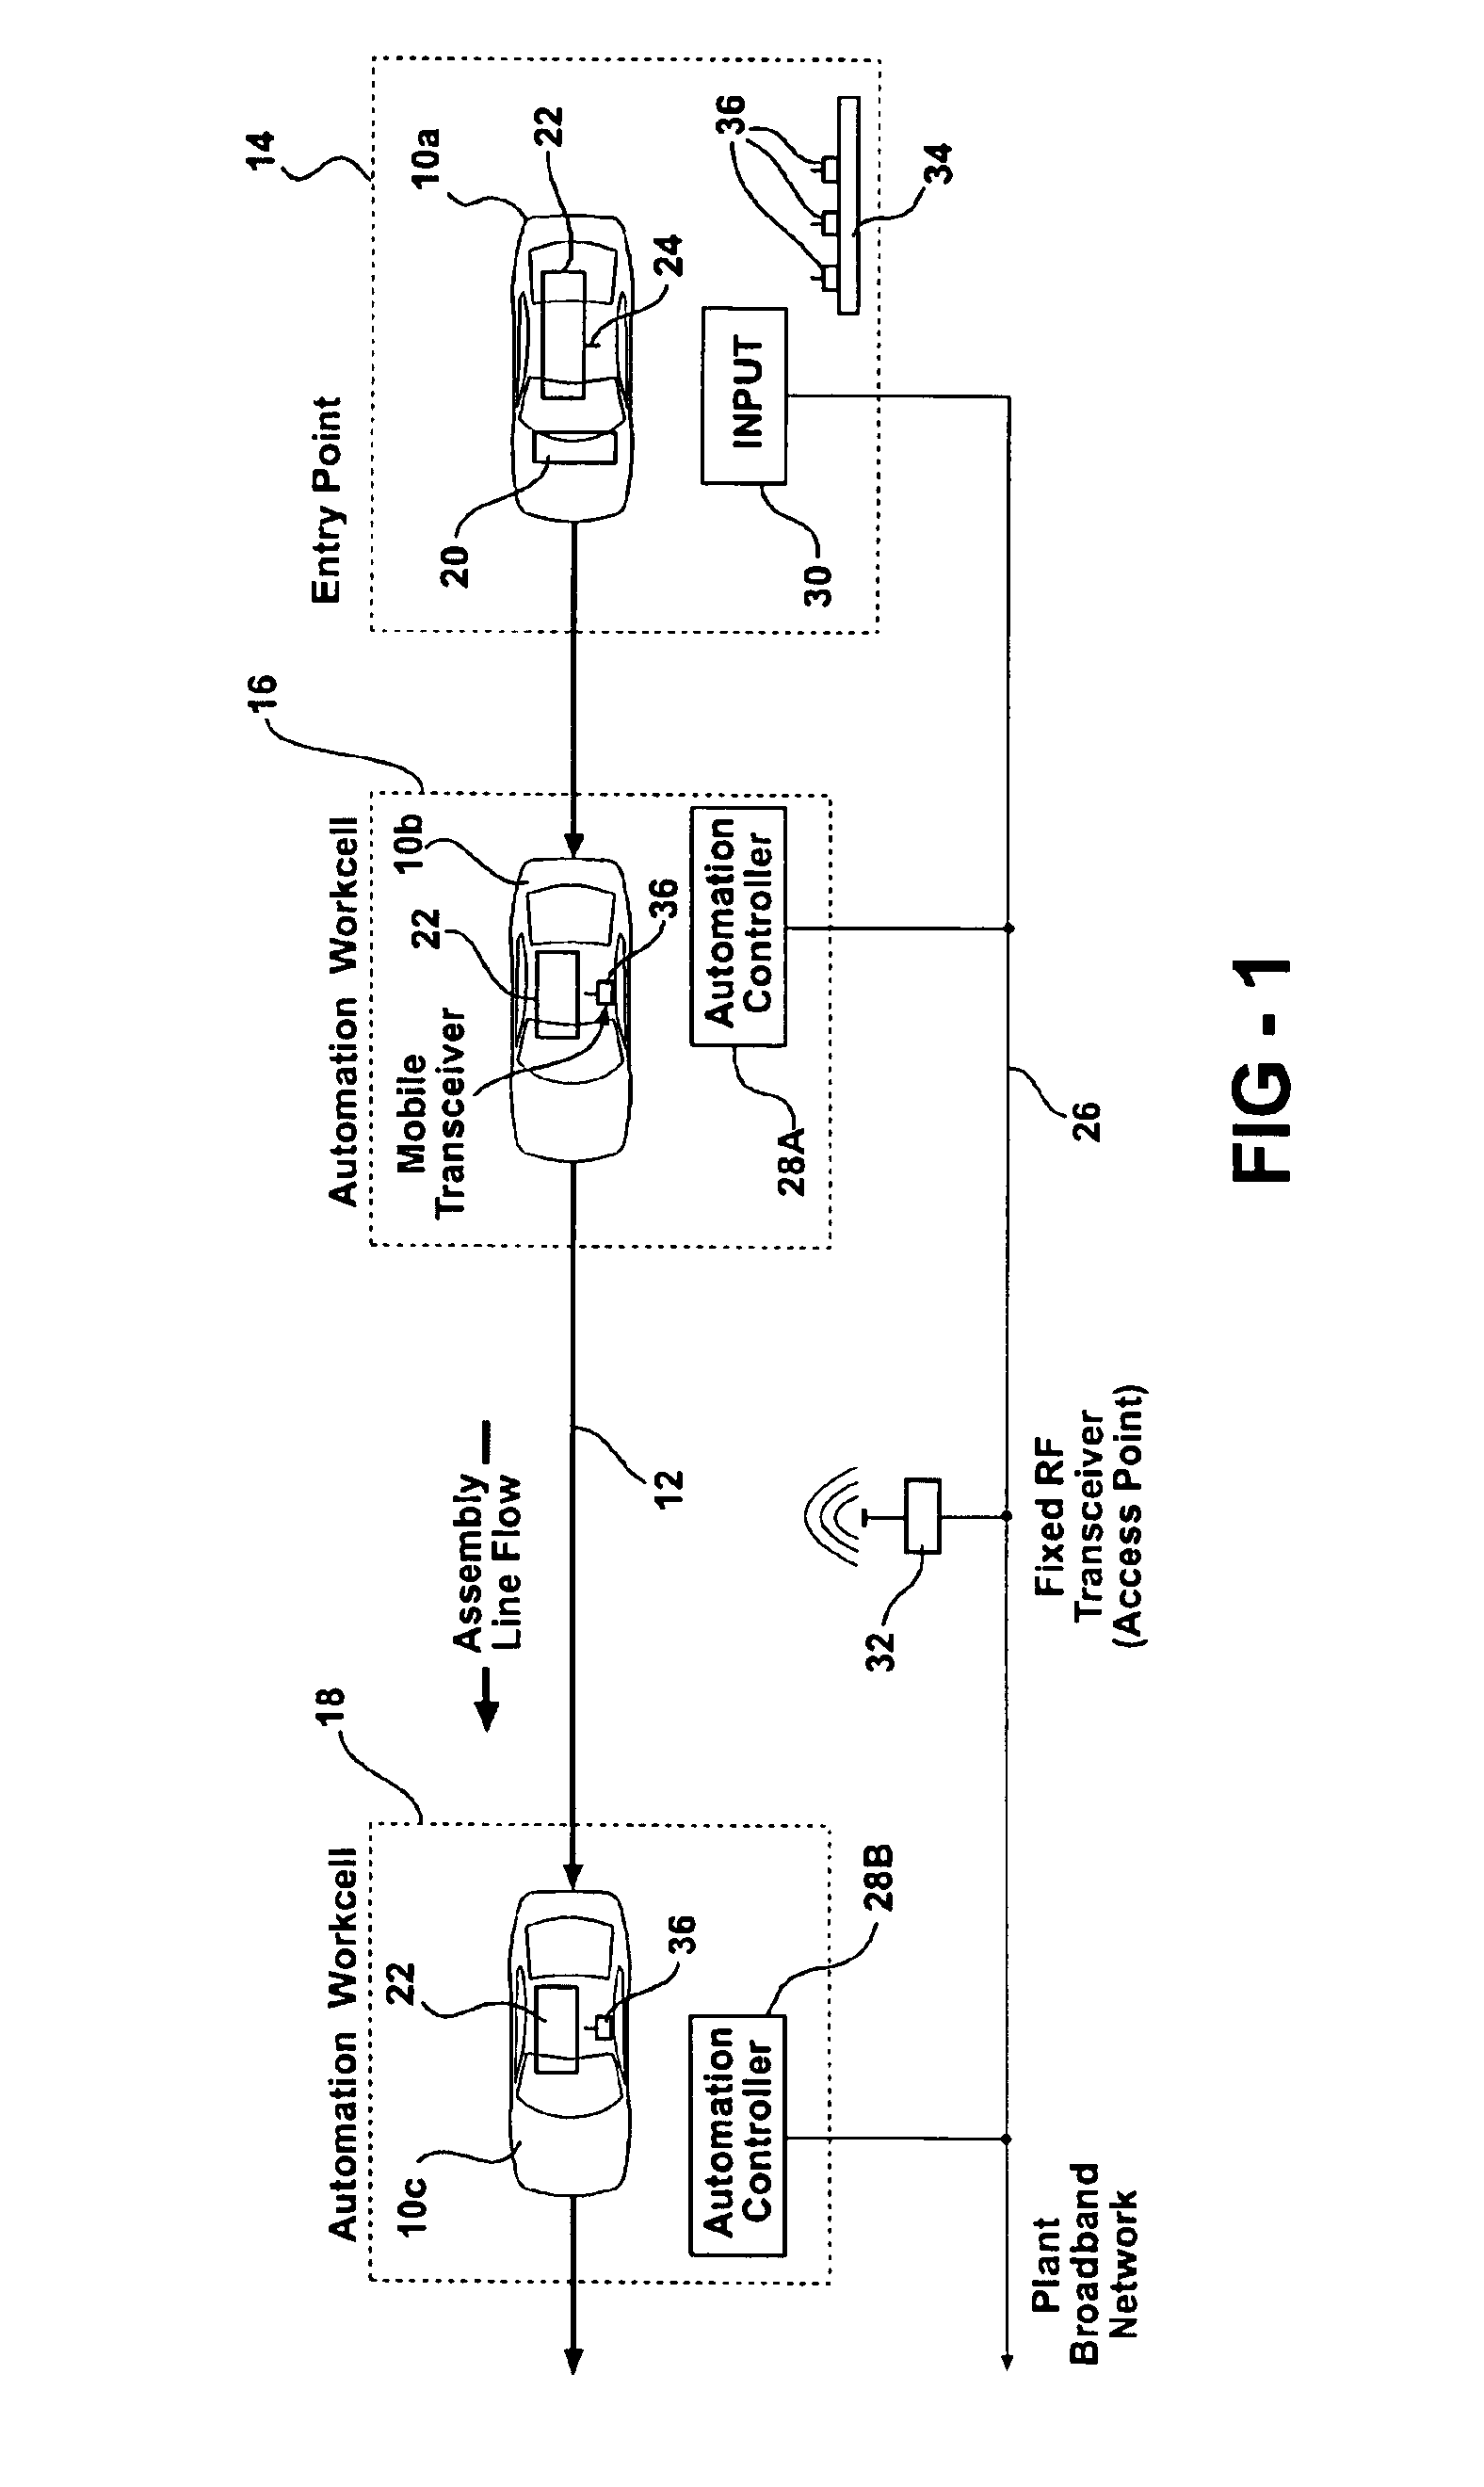 Product assembly method and apparatus using wireless communication capability